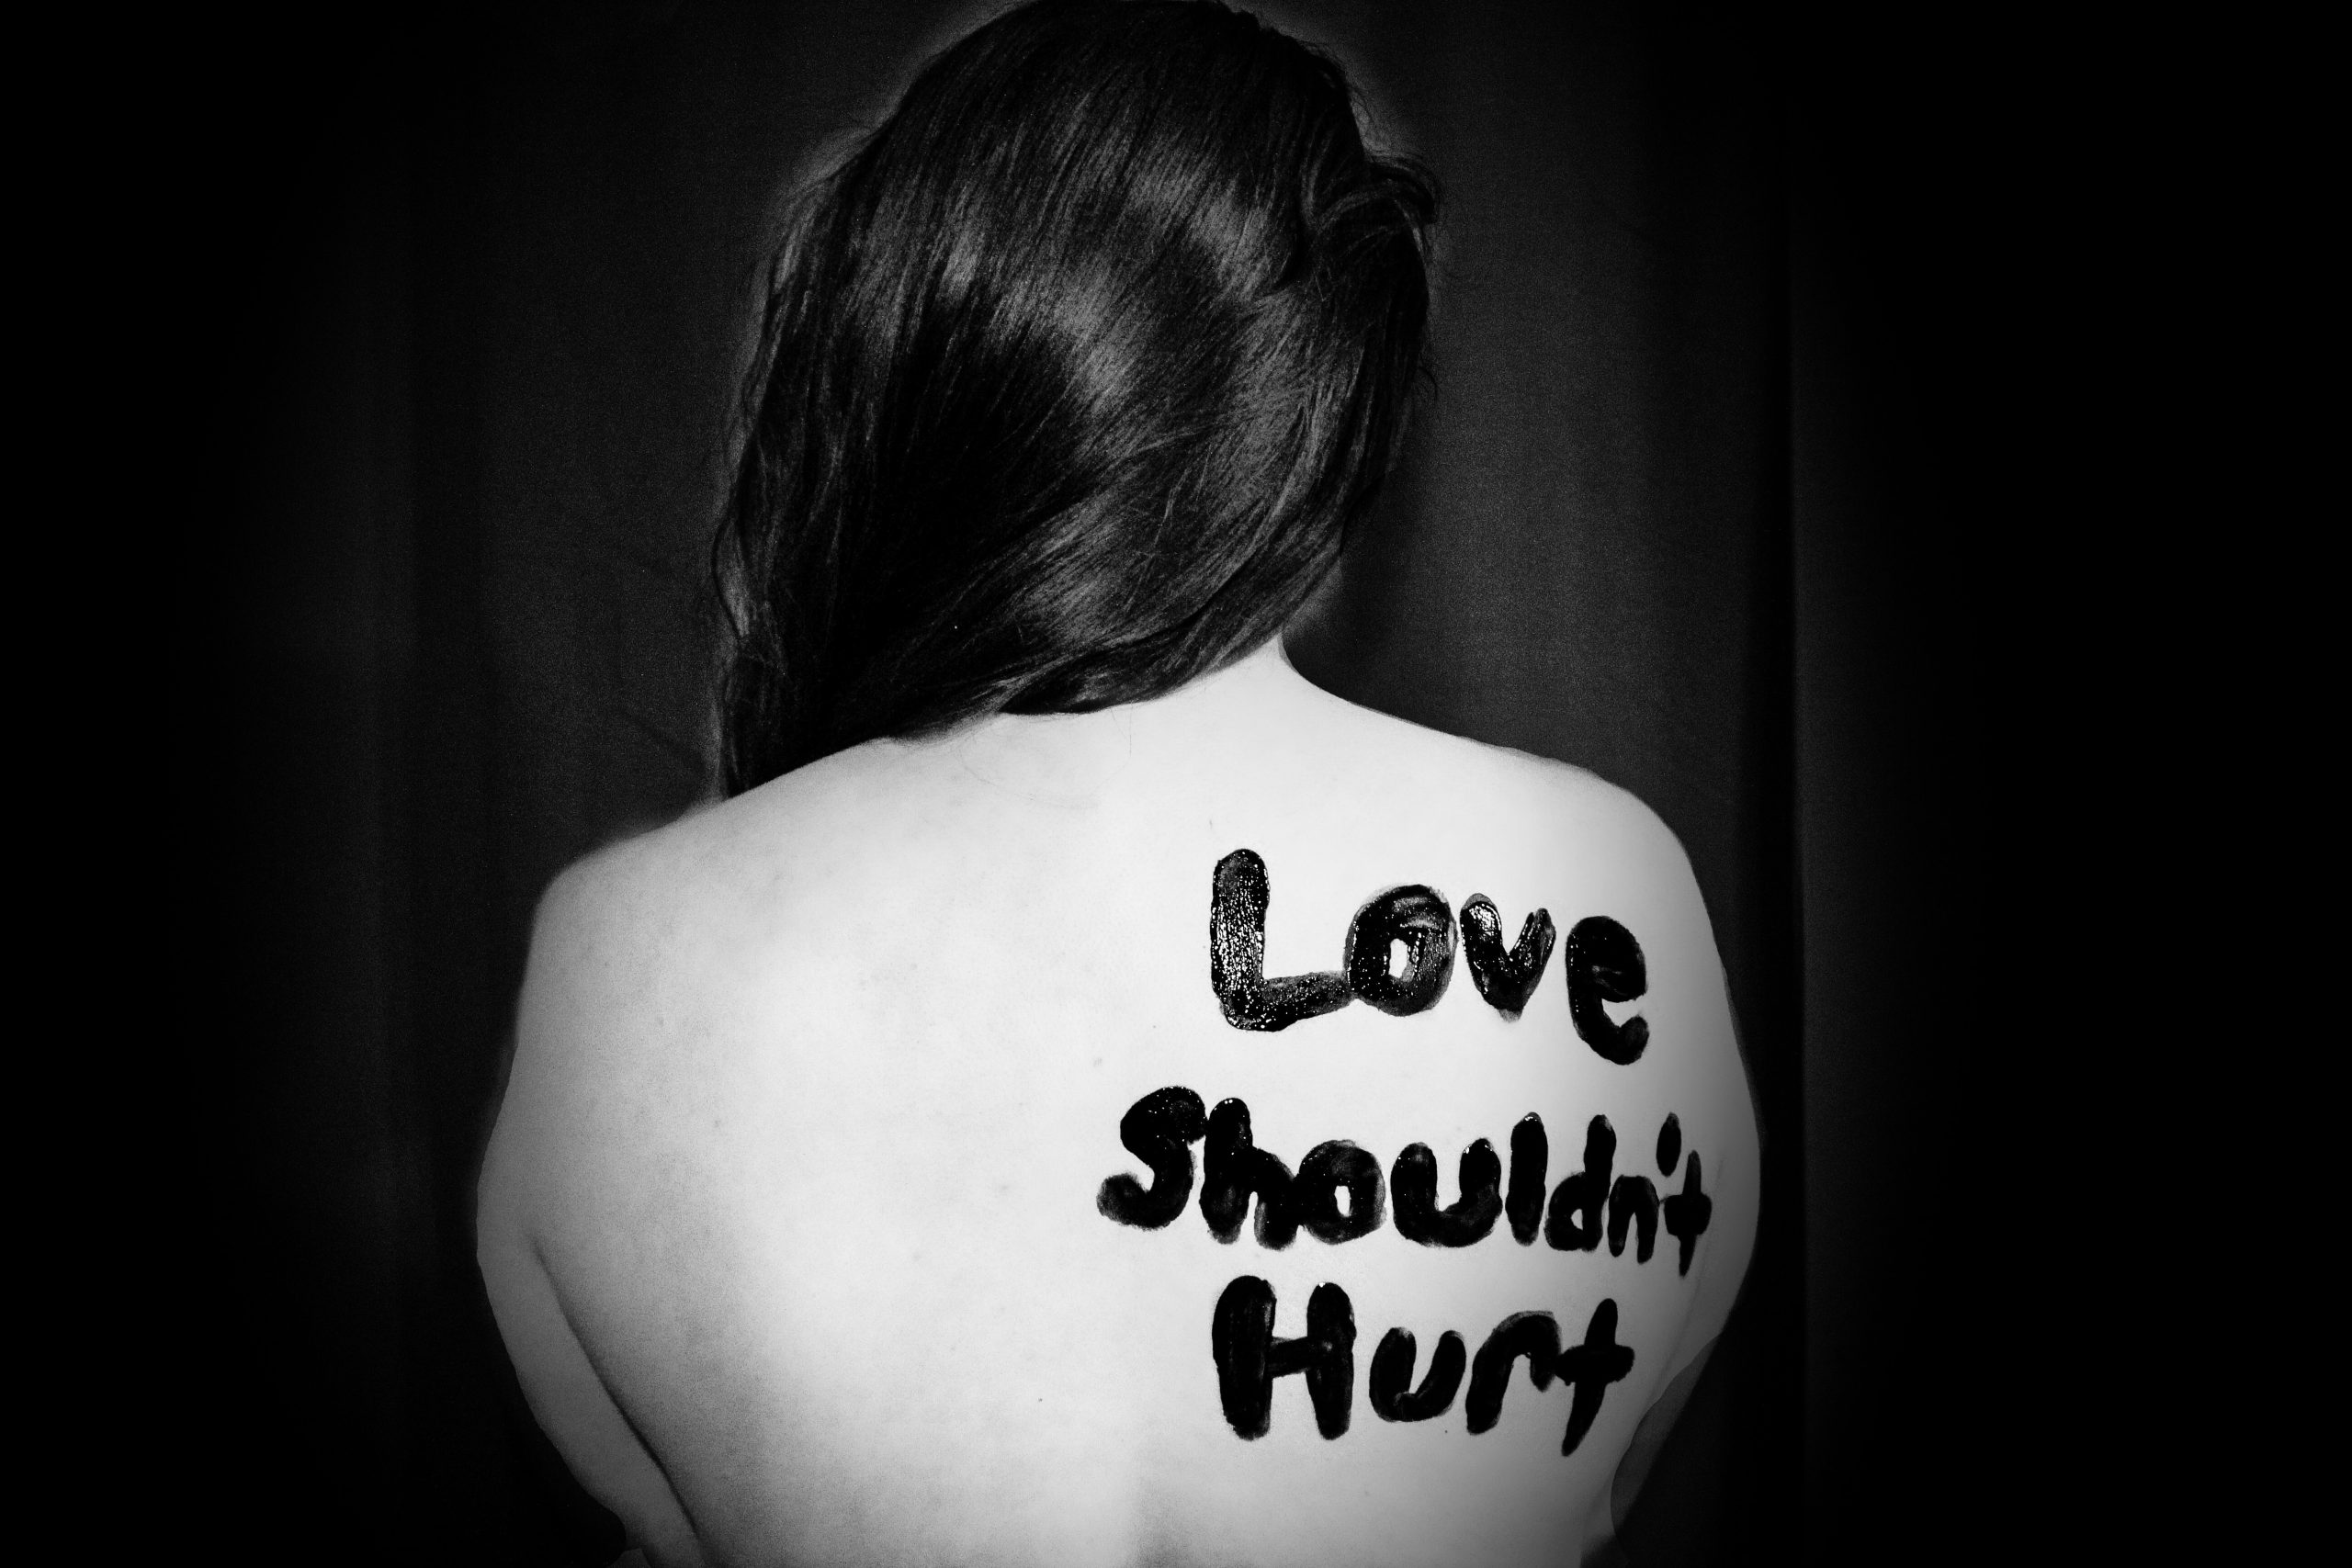 A woman with the words "Love Shouldn't Hurt" written on her back